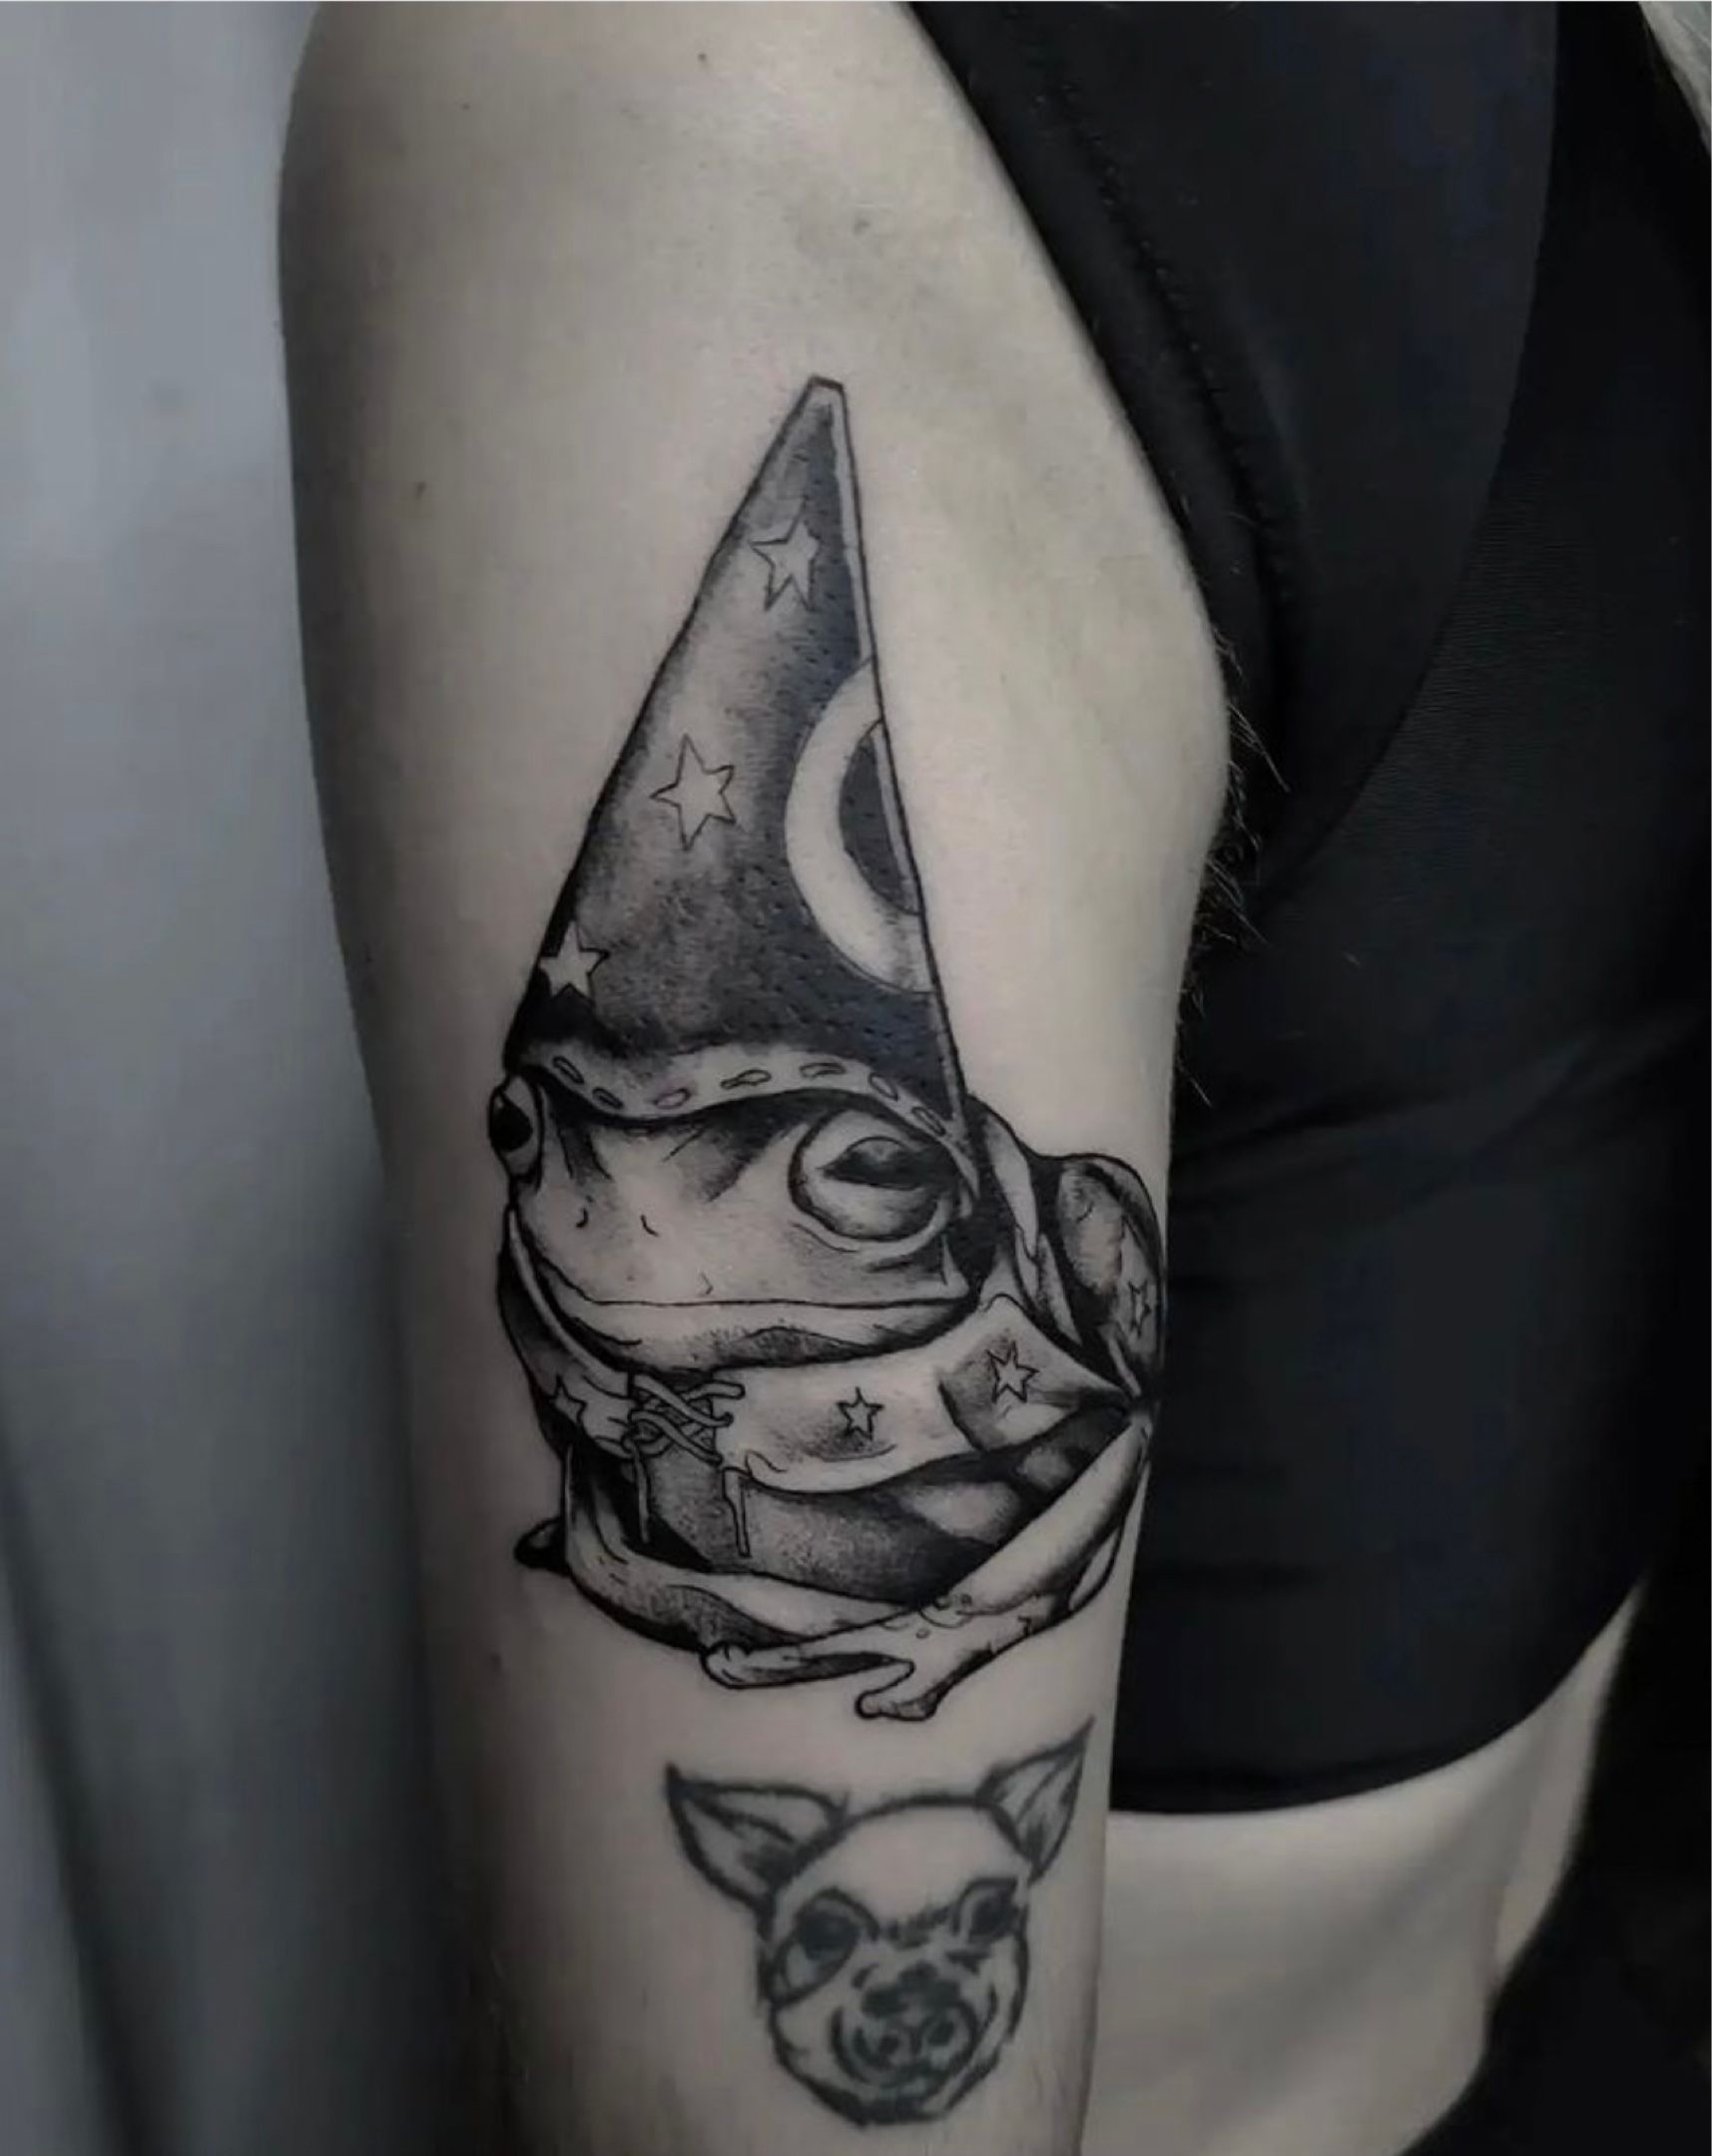 cj on Twitter Frog Wizard  done by Adam Knowles Reign amp Hail Tattoo  Manchester httpstcoKMYsNy1X9l  Twitter